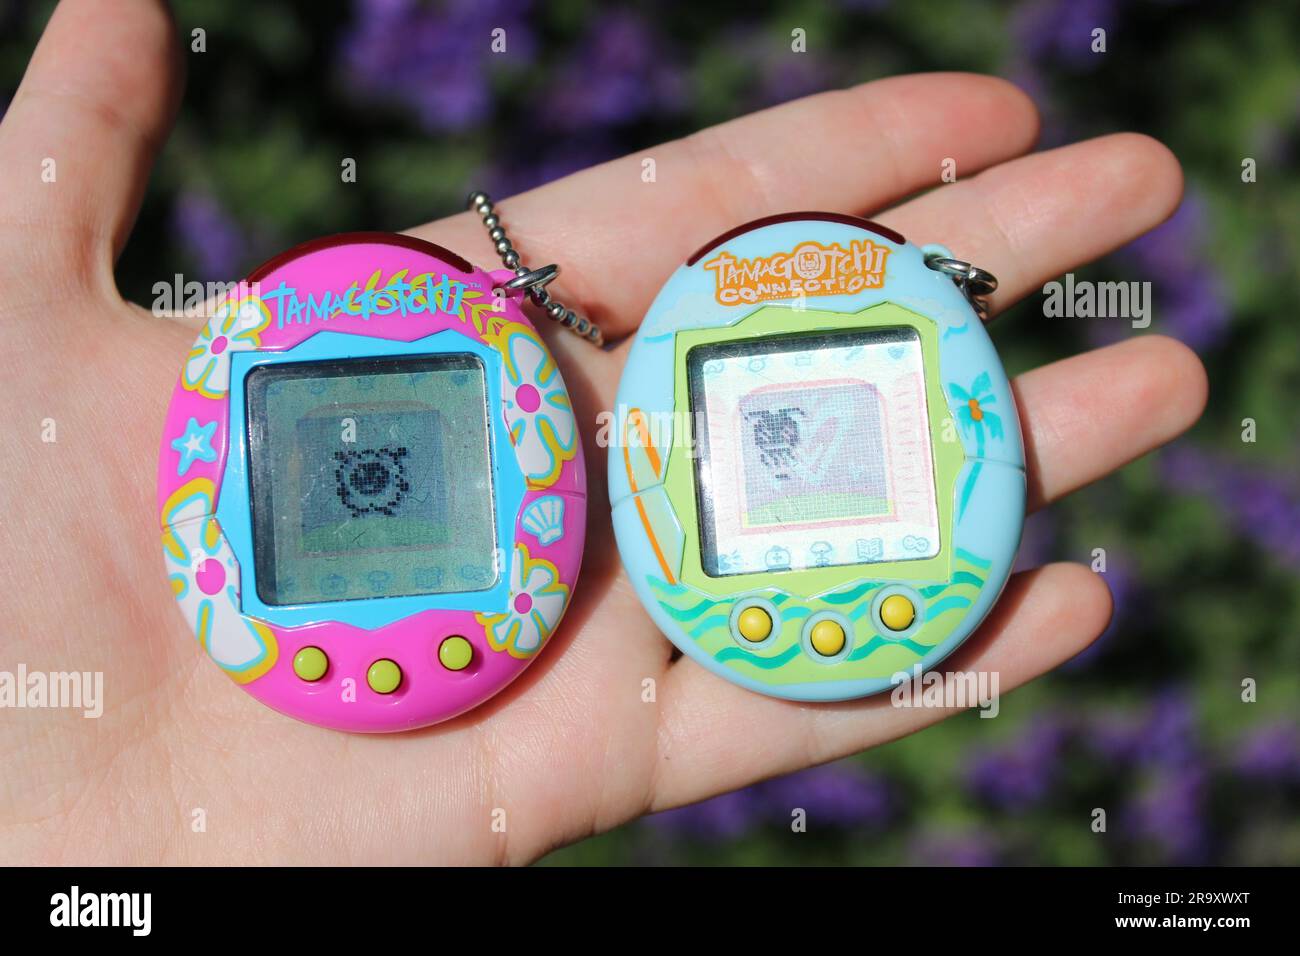 Two handheld tamagotchi devices, with pink and blue-green designs. Stock Photo